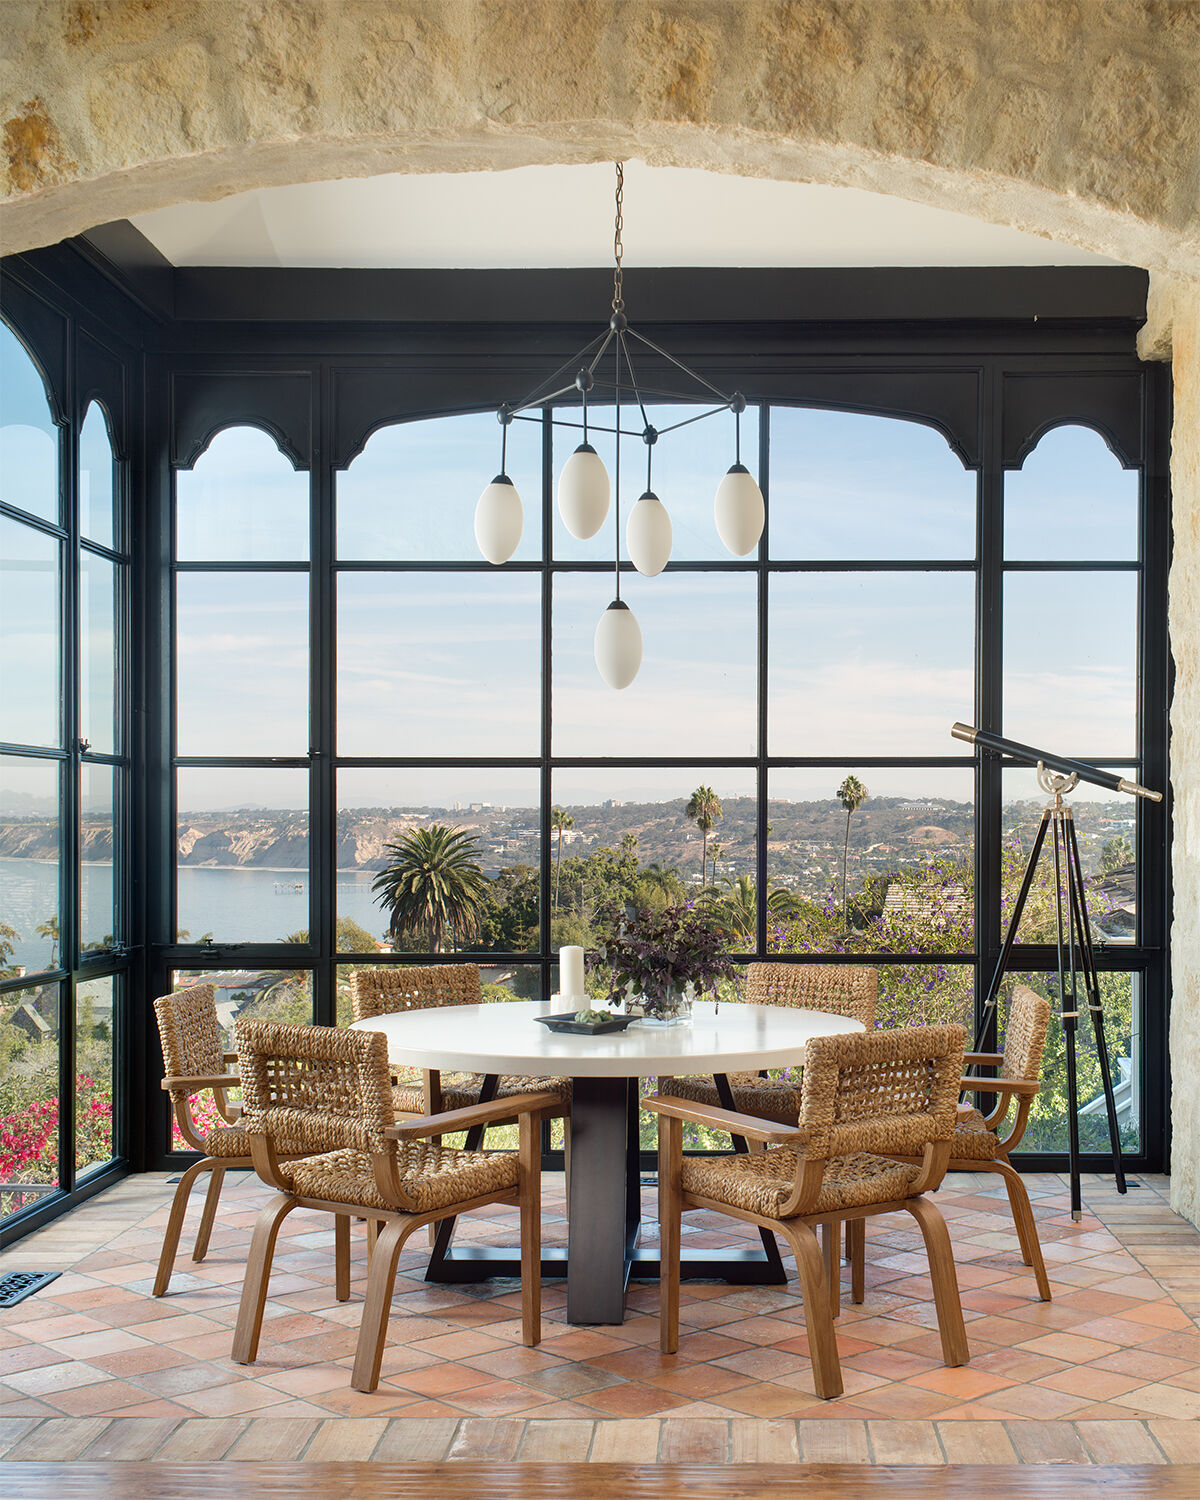 Rooms We Love / Dining Space